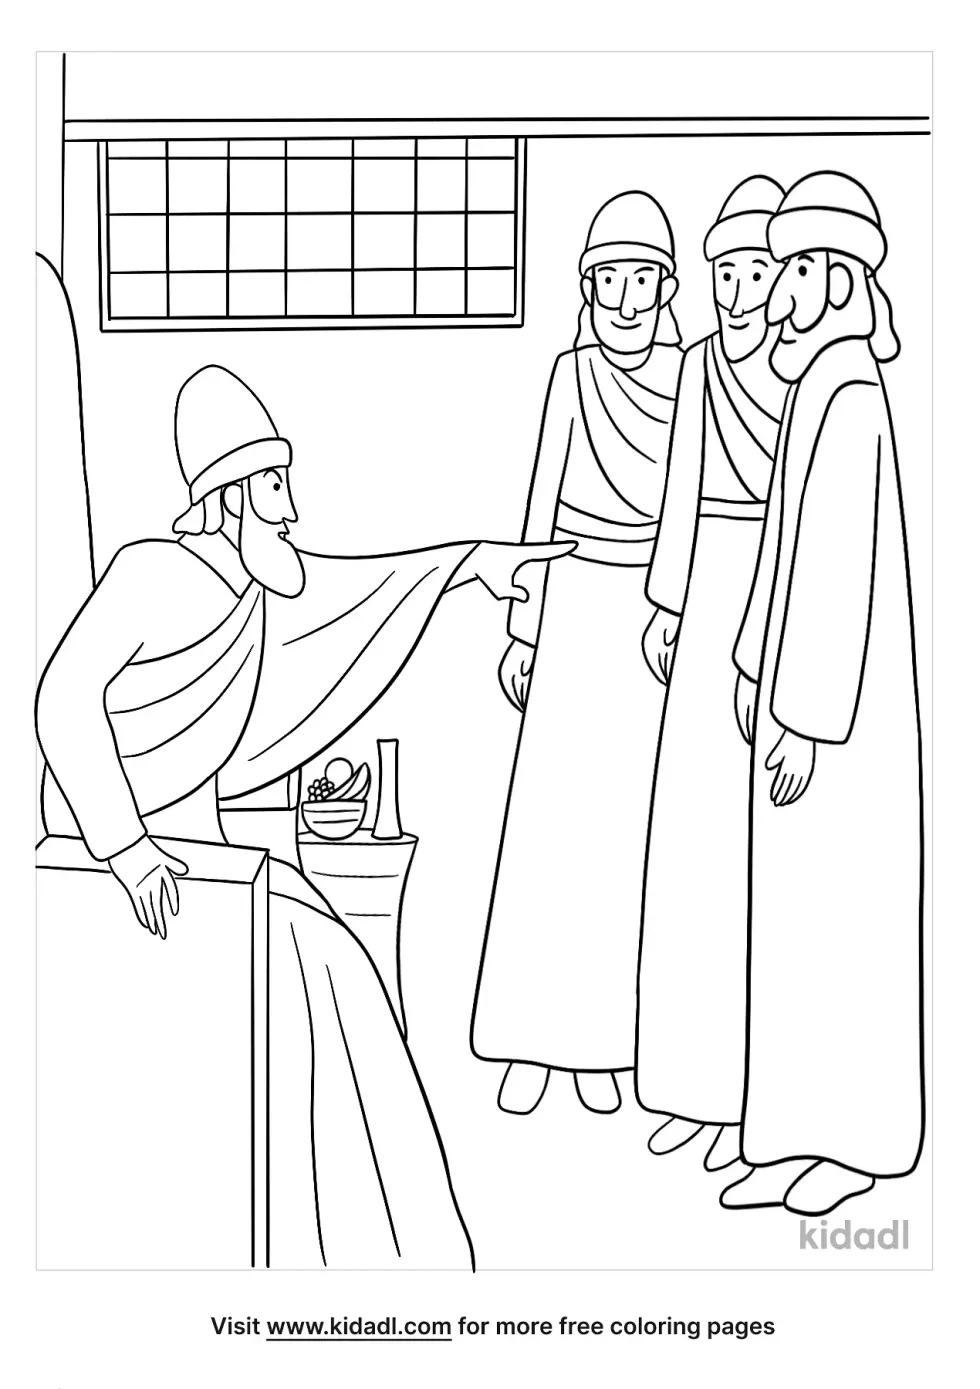 Herod Talking To The Wise Men Coloring Page